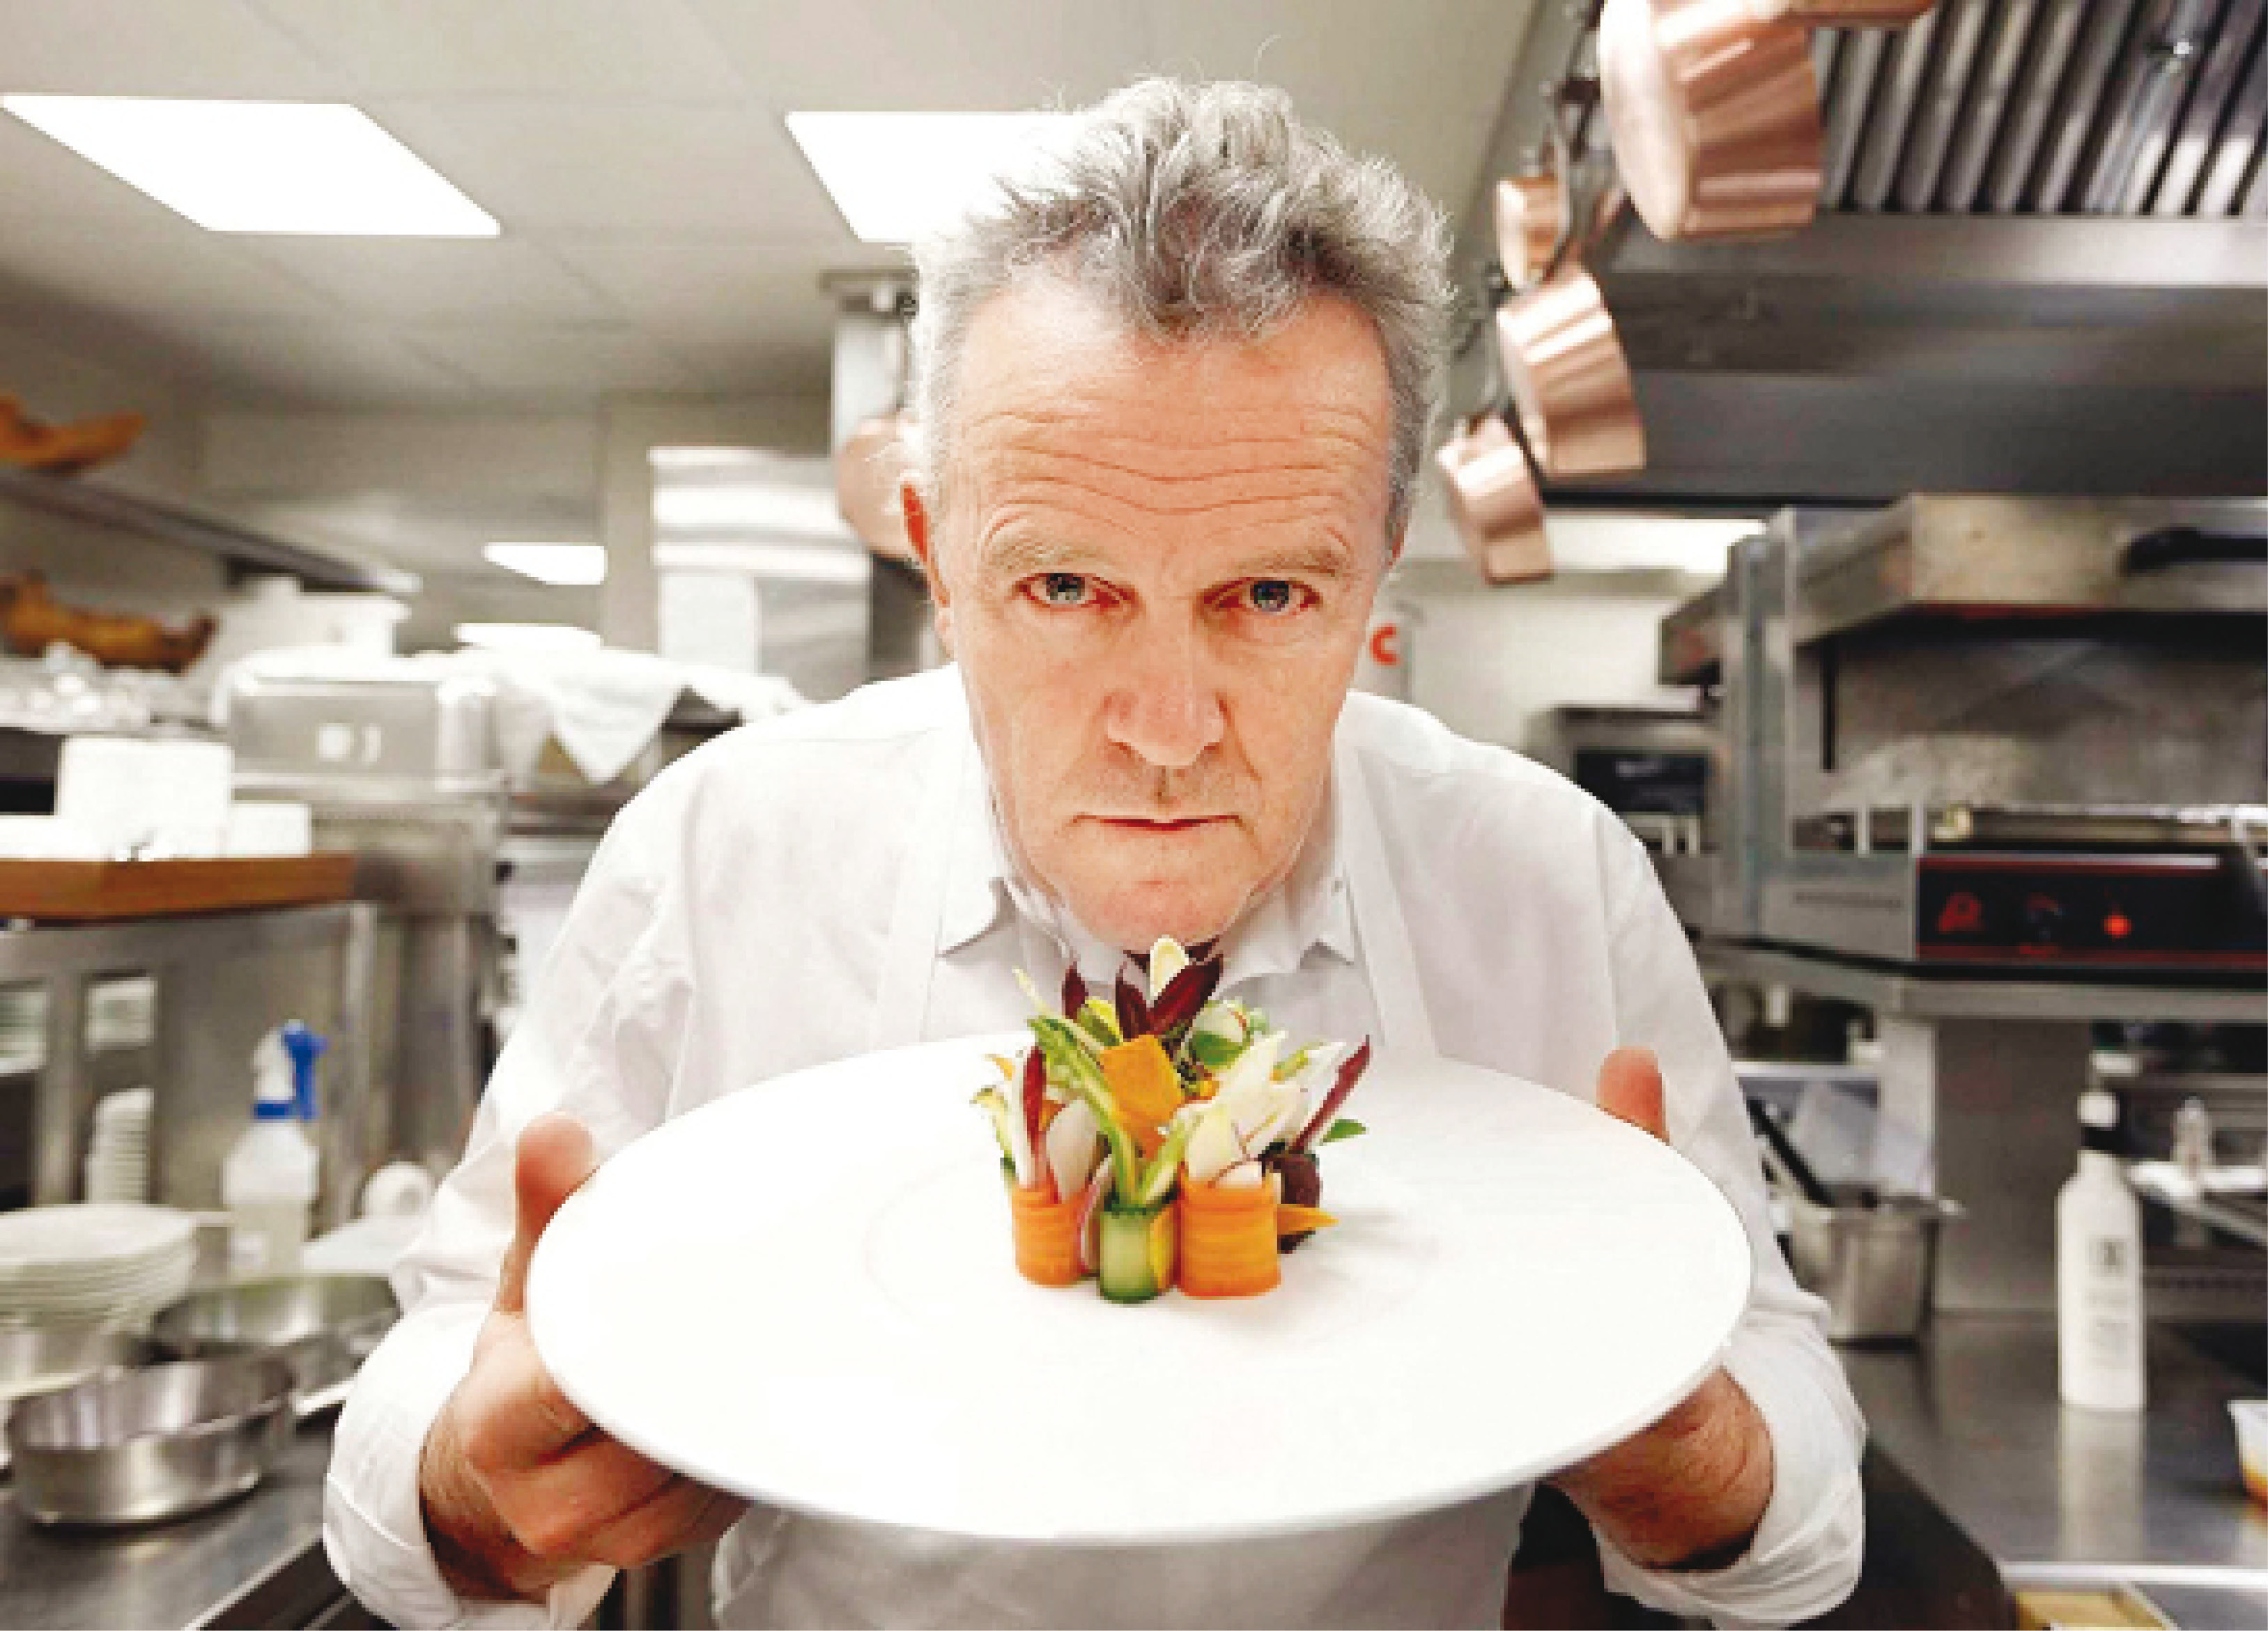 Alain Passard’s choice of taking meat off his menu was more of a culinary choice than about sustainability